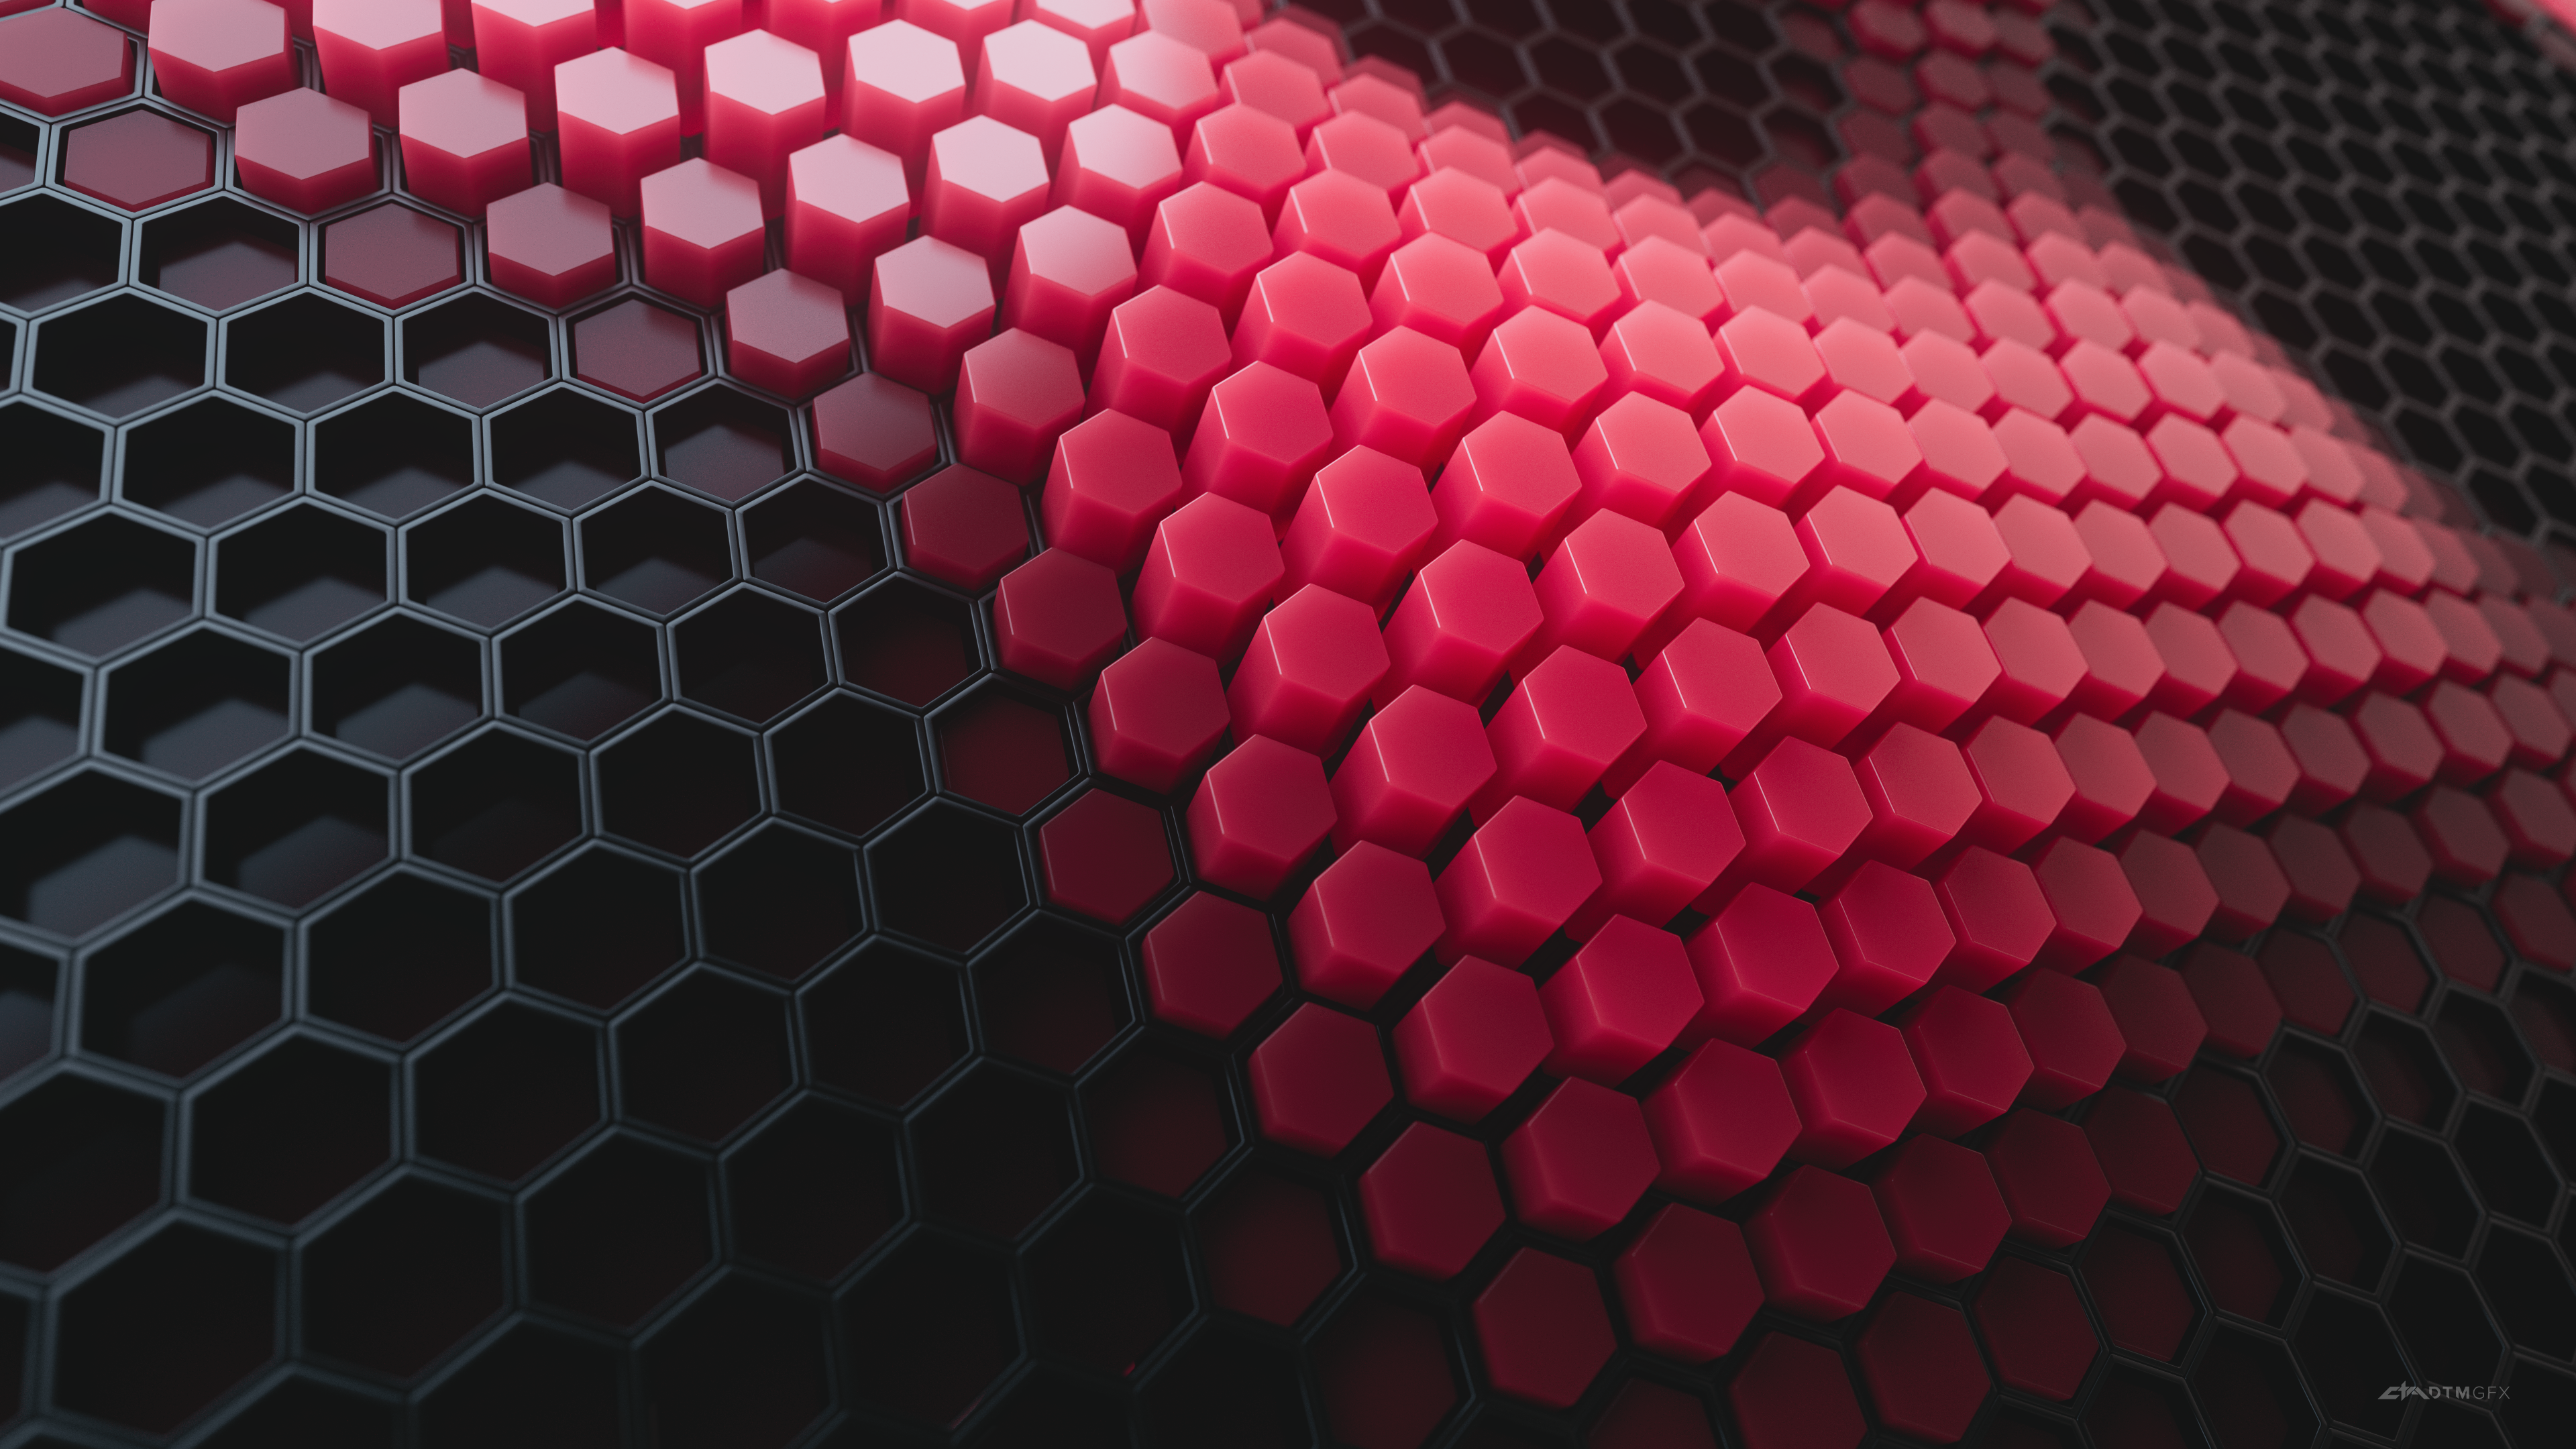 Hexagons 4K Wallpaper, Patterns, Red background, Red blocks, Black blocks, 3D background, Abstract